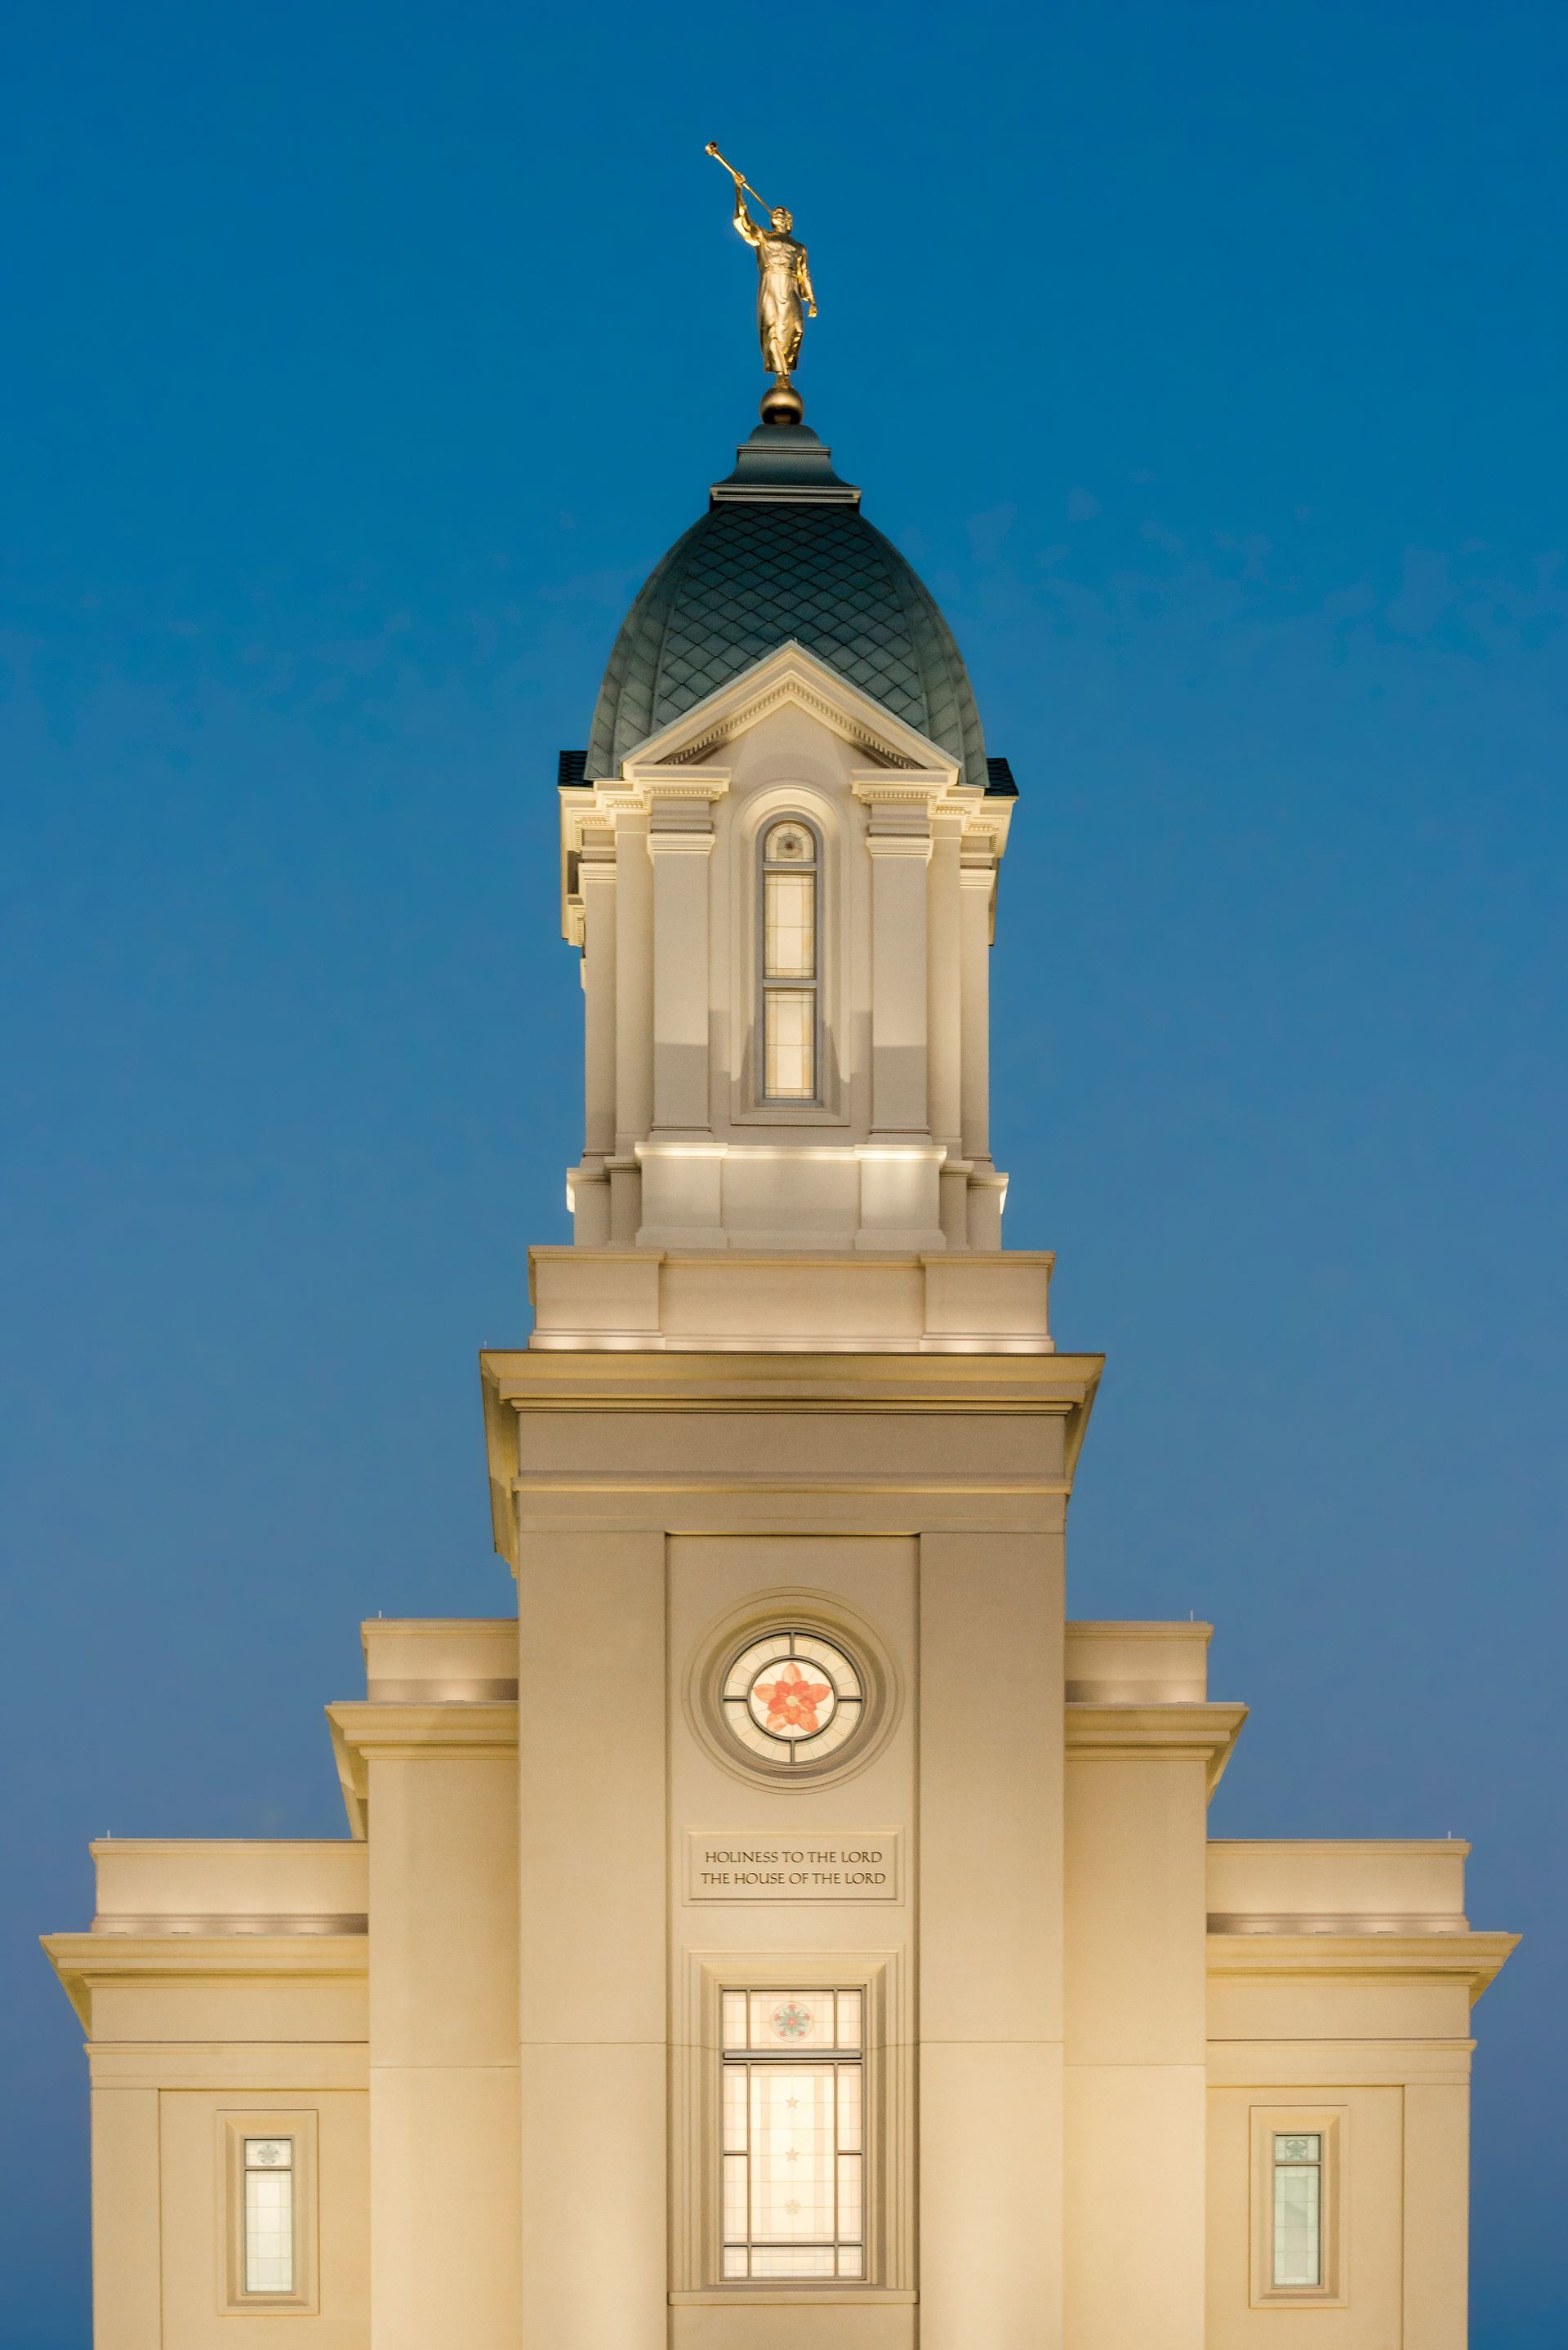 A photograph of the Cedar City Utah Temple steeple in the late evening.